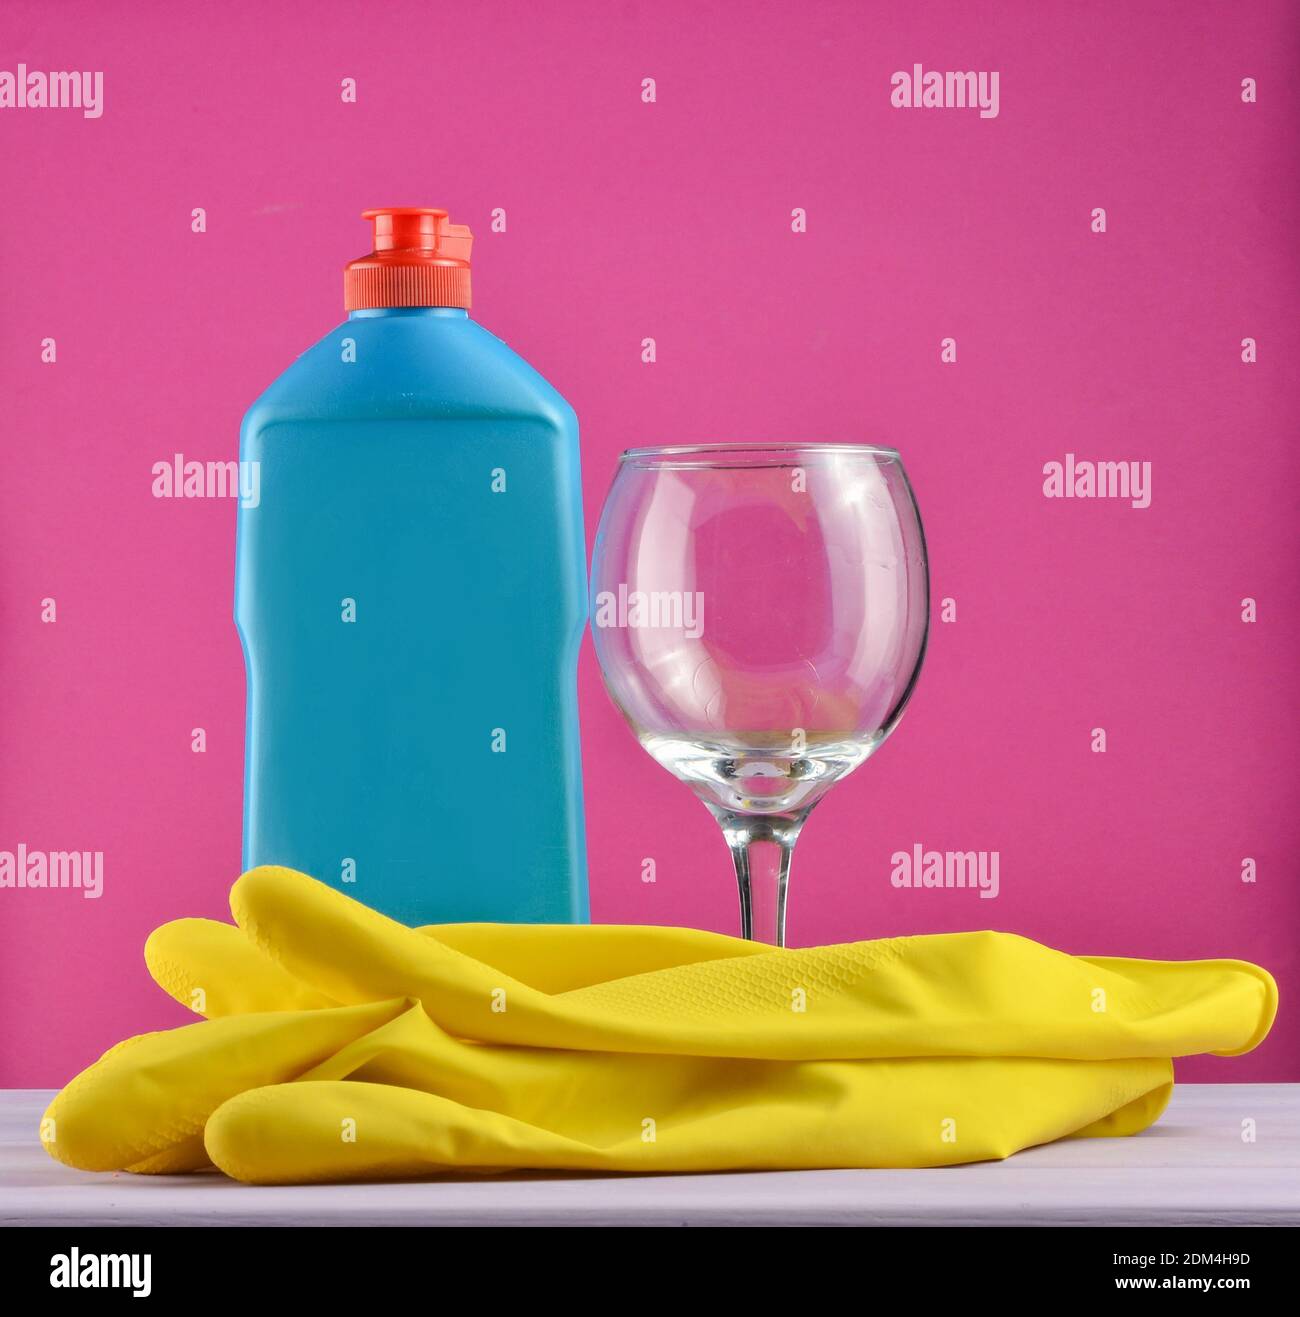 https://c8.alamy.com/comp/2DM4H9D/accessories-for-dishwashing-and-house-cleaning-dishwashing-bottle-of-detergentglass-and-yellow-rubber-gloves-on-pink-background-2DM4H9D.jpg